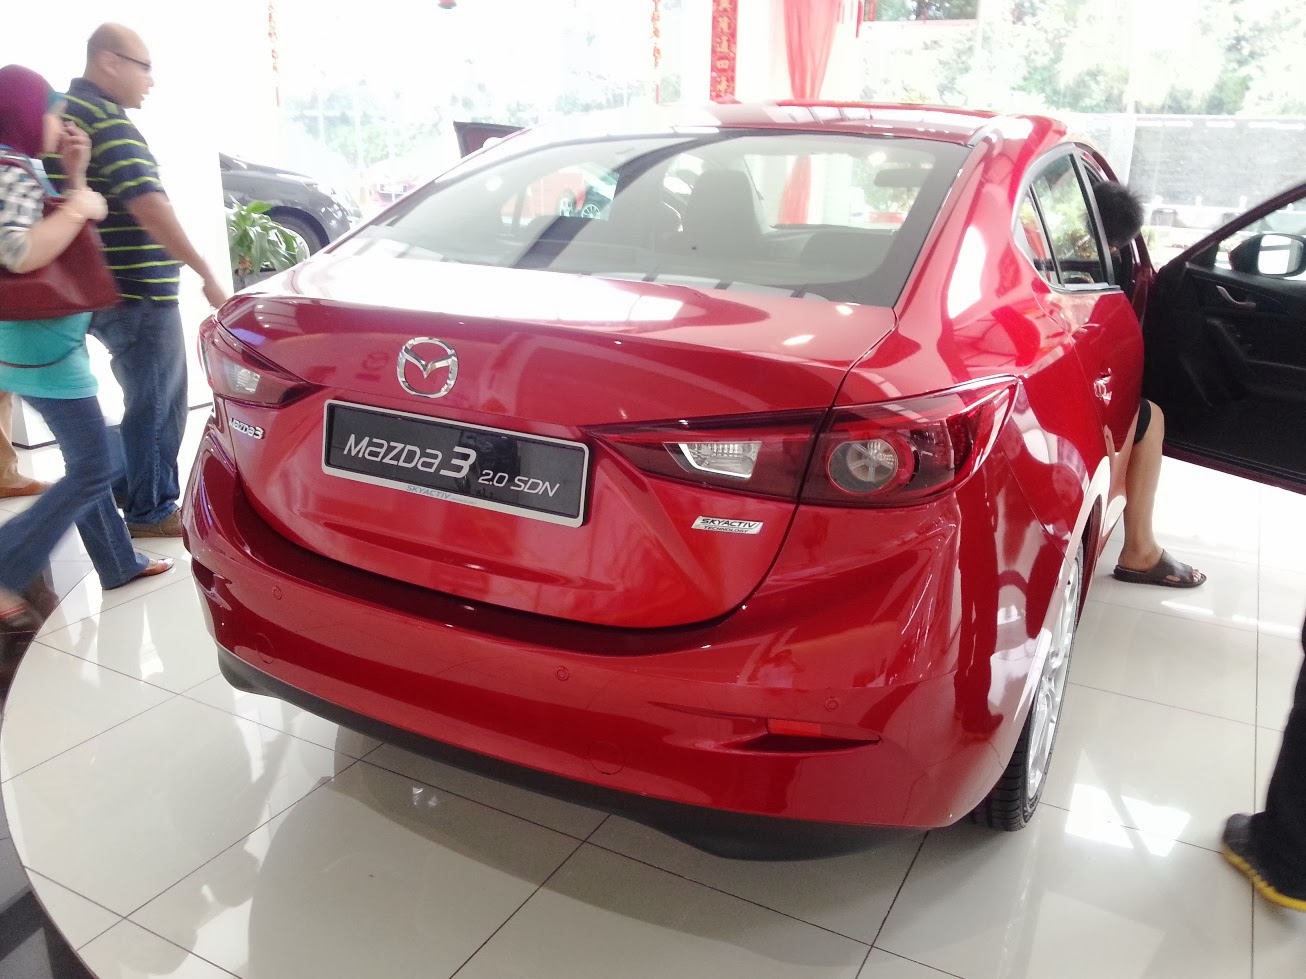 ASIAN AUTO DIGEST: The New 2014 Mazda 3 Launched Malaysia Sports